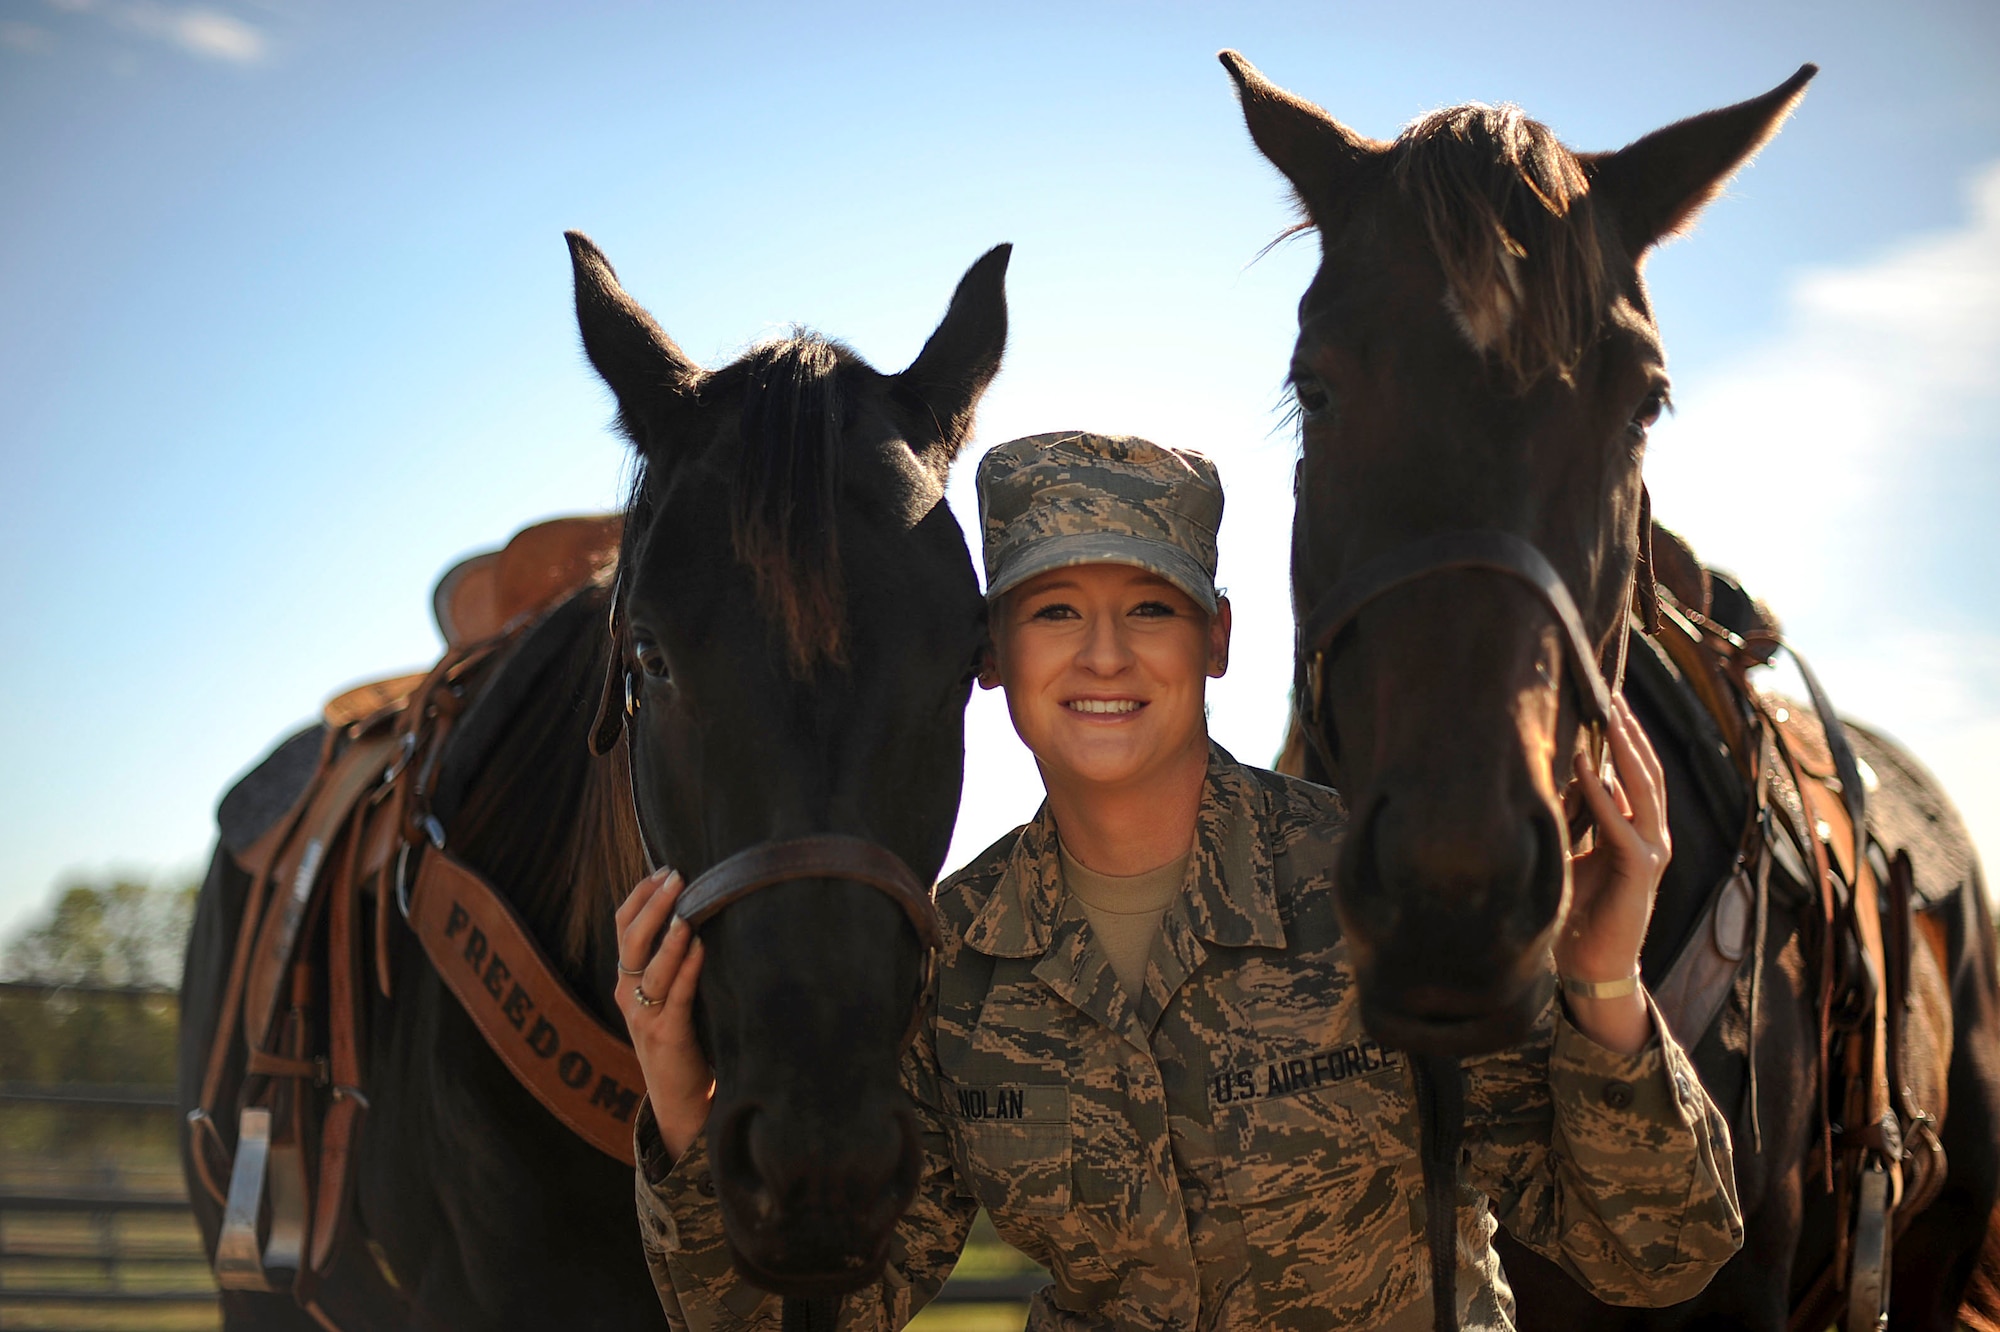 Airman 1st Class Lauren Nolan, 22nd Logistics Readiness Squadron materials management journeyman, poses for a photo with her horses, Tiz and Shoobie, Oct. 13, 2016, in Wichita, Kan. When Nolan moved to McConnell Air Force Base, Kan. her first duty station she had her horses shipped to the area and now boards them off-base in the local community. (U.S. Air Force photo/ Airman 1st Class Jenna K. Caldwell)